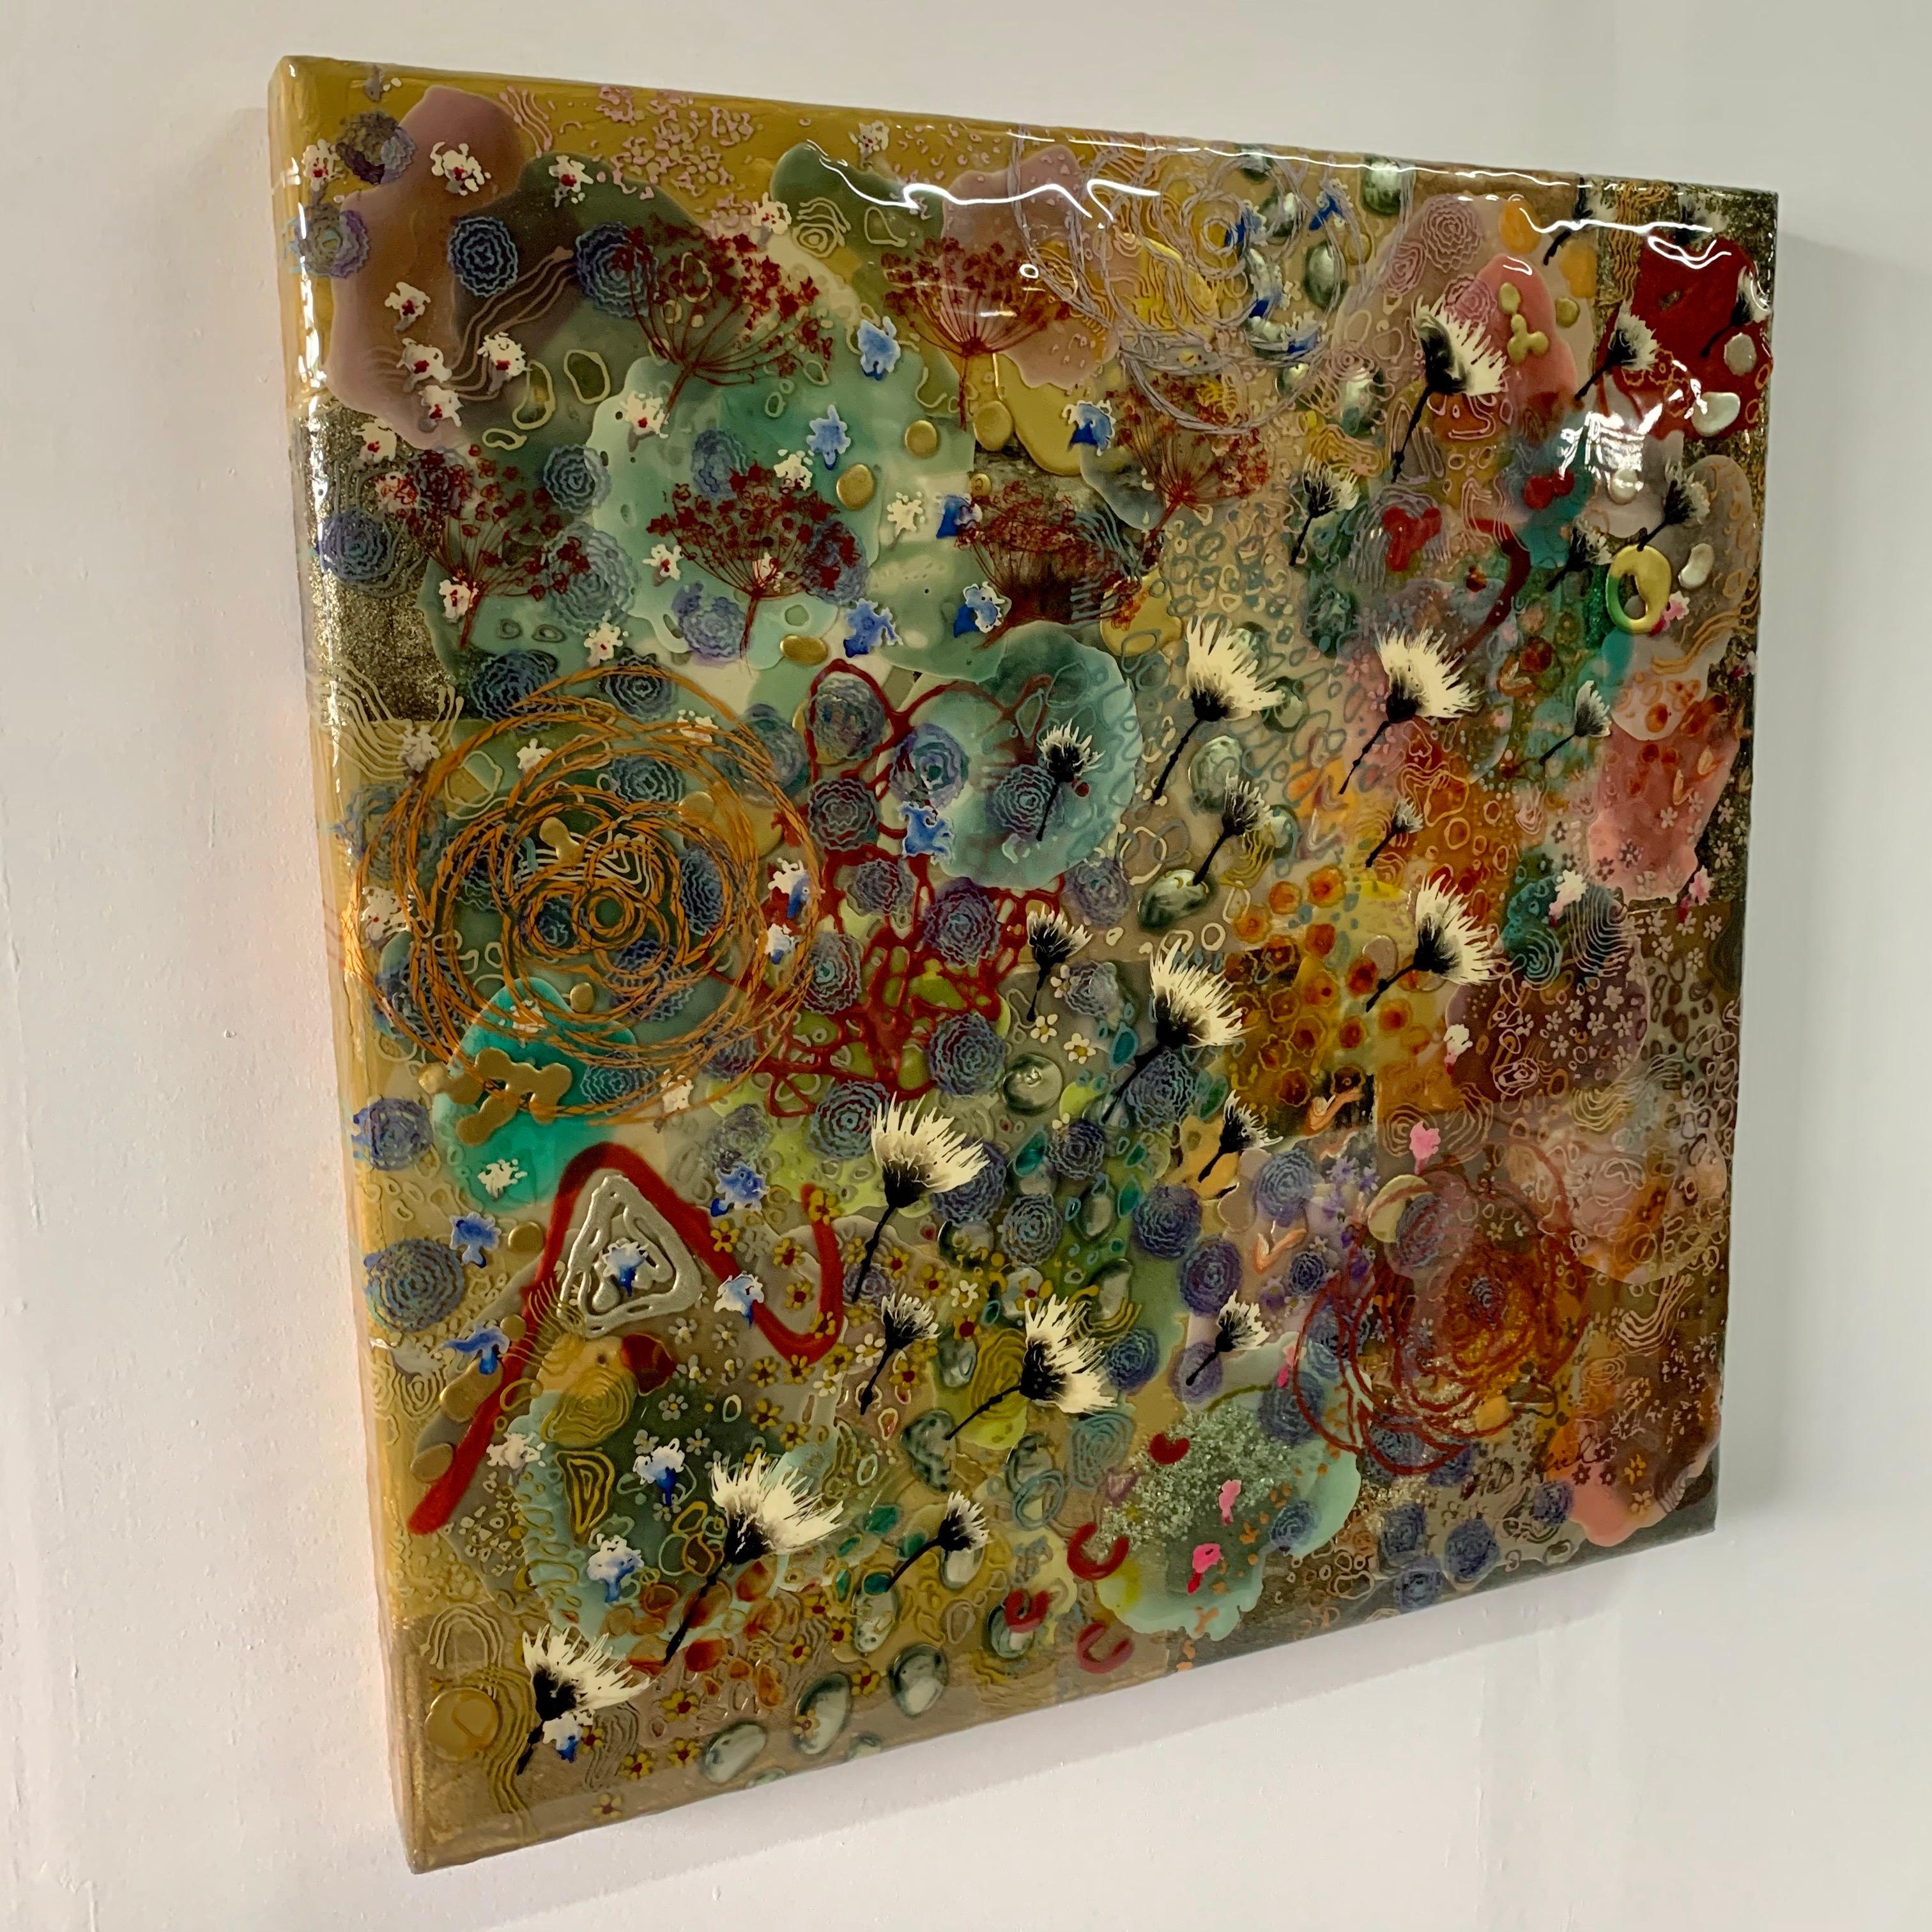 This exquisite and colorful resin painting with many many whimsical elements, shows the artistry and creativity of Ms. Reich. Signed and dated to verso.

Biography: Andrea Dasha Reich, born in Prague and schooled in Jerusalem at the Bezalel